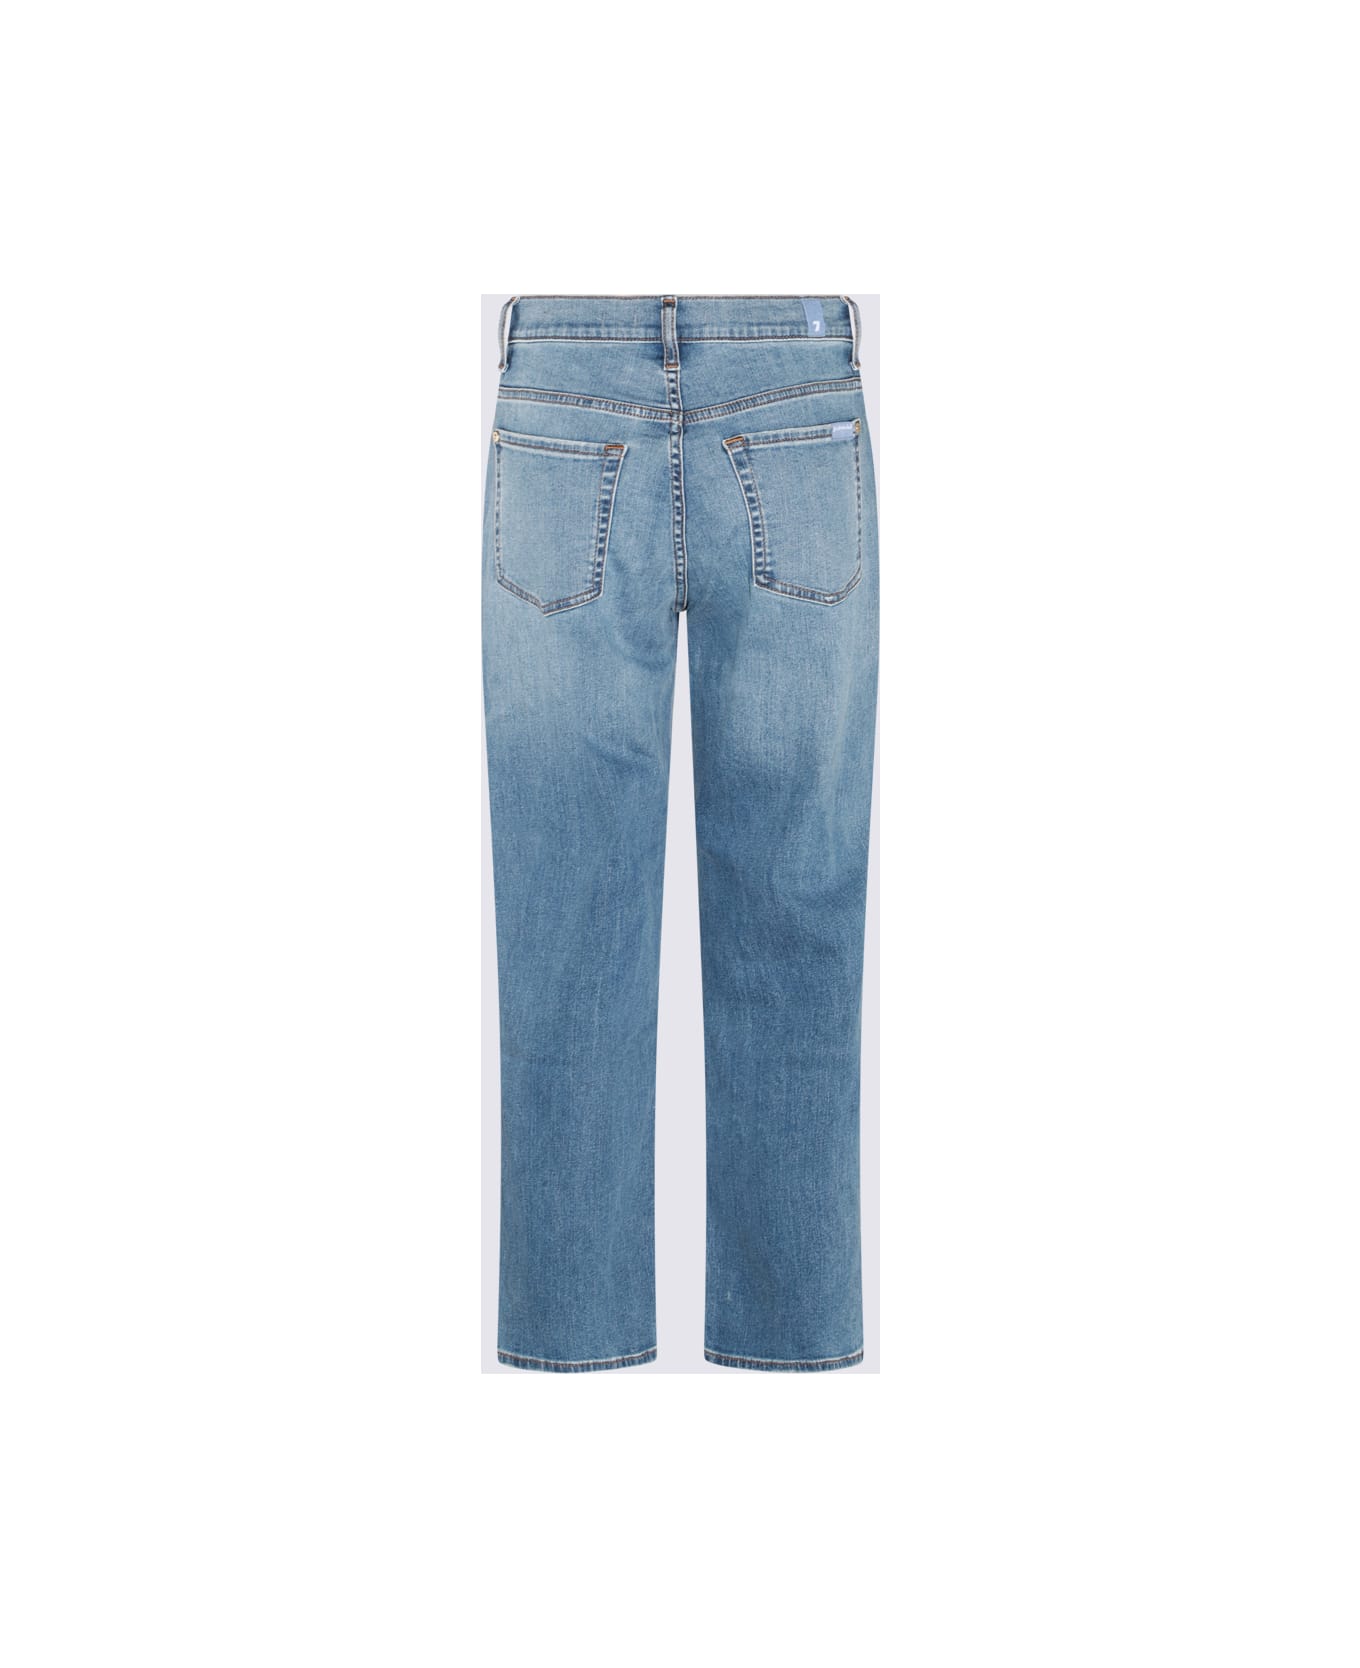 7 For All Mankind Blue Cotton Blend Jeans - DIARY